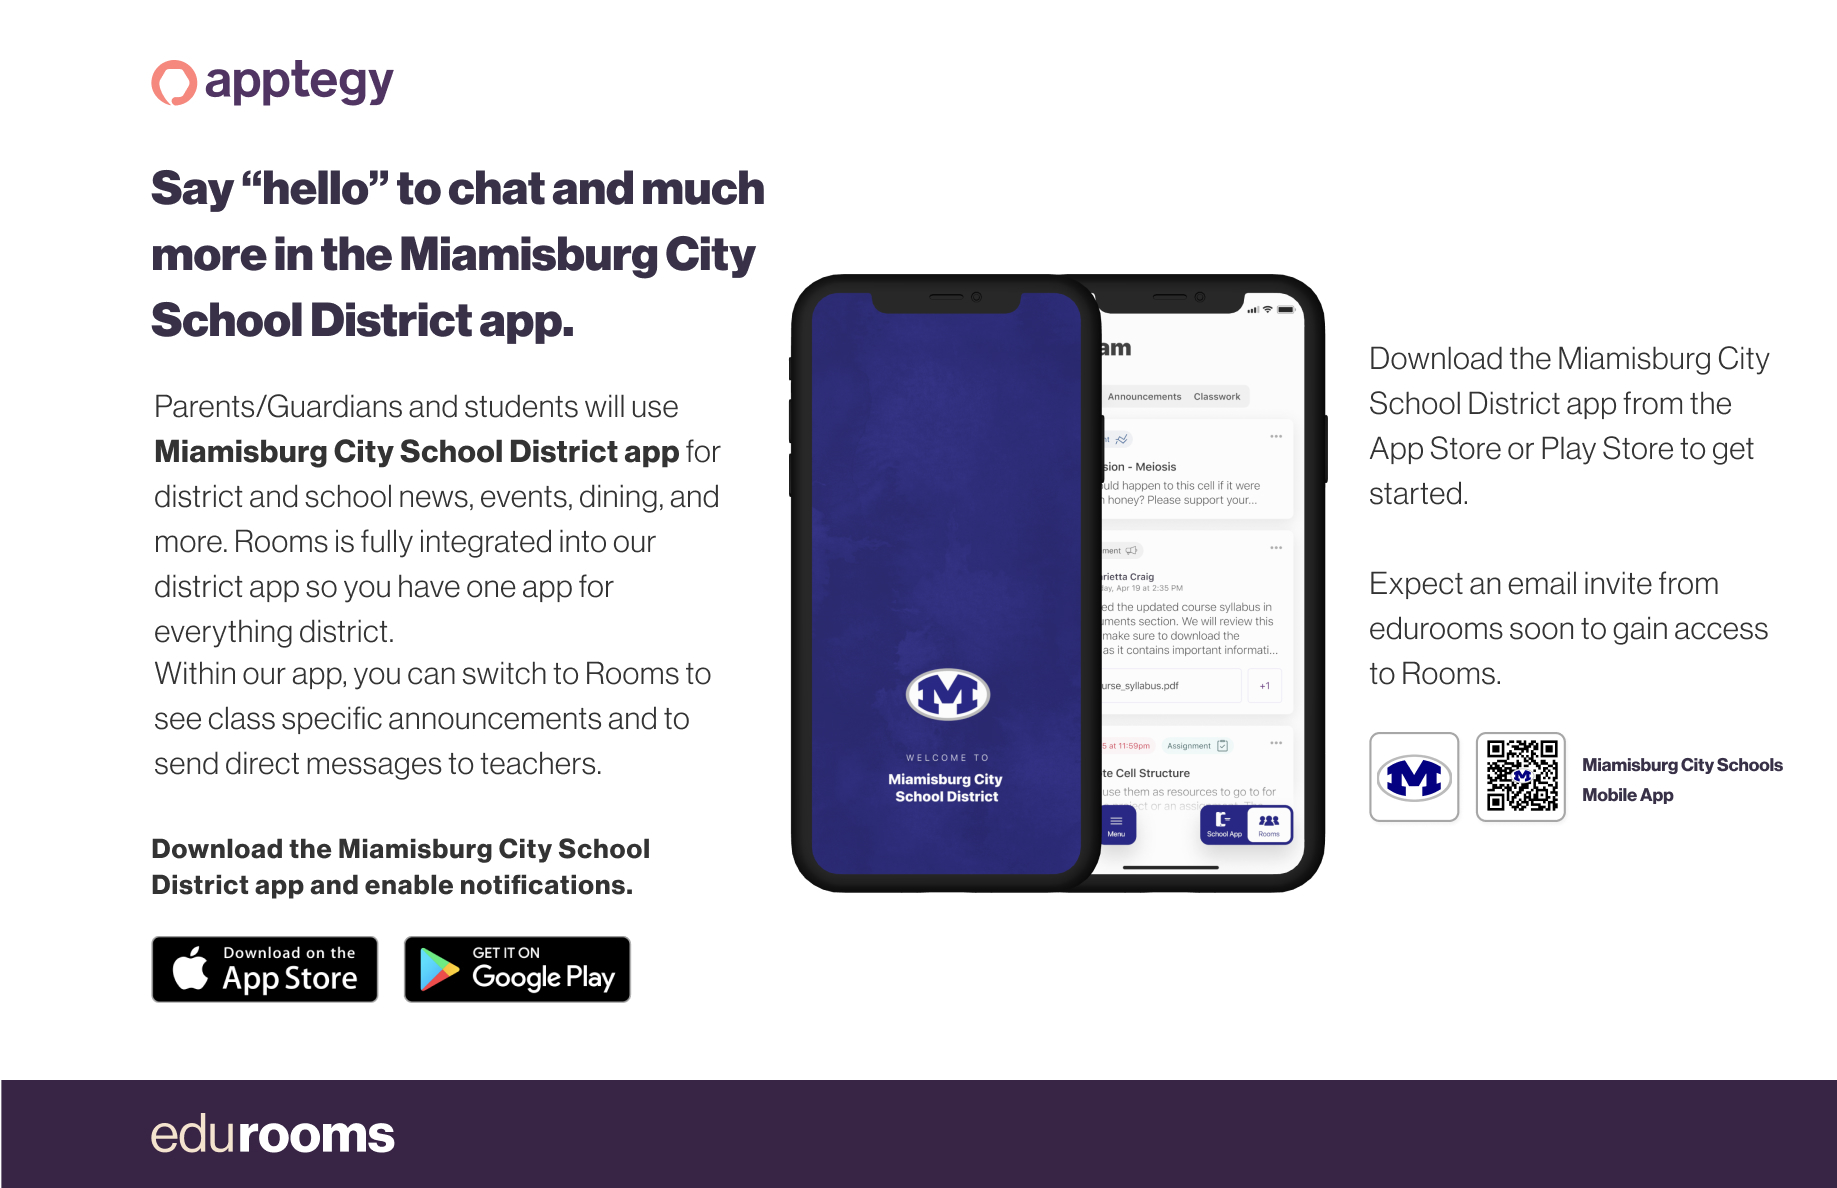 Say "hello" to chat and much more in the Miamisburg City School District app. Parents/Guardians and students will use Miamisburg City School District app for district and school news, events, dining, and more. Rooms is fully integrated into our district app so you have one app for everything district. Within our app, you can switch to Rooms to see class specific announcements and to send direct messages to teachers. Download the Miamisburg City School District app and enable notifications. Download on the App Store GET IT ON Google Play edurooms WELCOME TO Miamisburg City School District sion - Meiosis uld happen to this cell if it were 1 honey. Please support your. ed the updated course syllabus in ments section. We will review this make sure to download the as it contains important informati. to Co Cerature Download the Miamisburg City School District app from the App Store or Play Store to get started. Expect an email invite from edurooms soon to gain access to Rooms. Miamisburg City Schools Mobile App